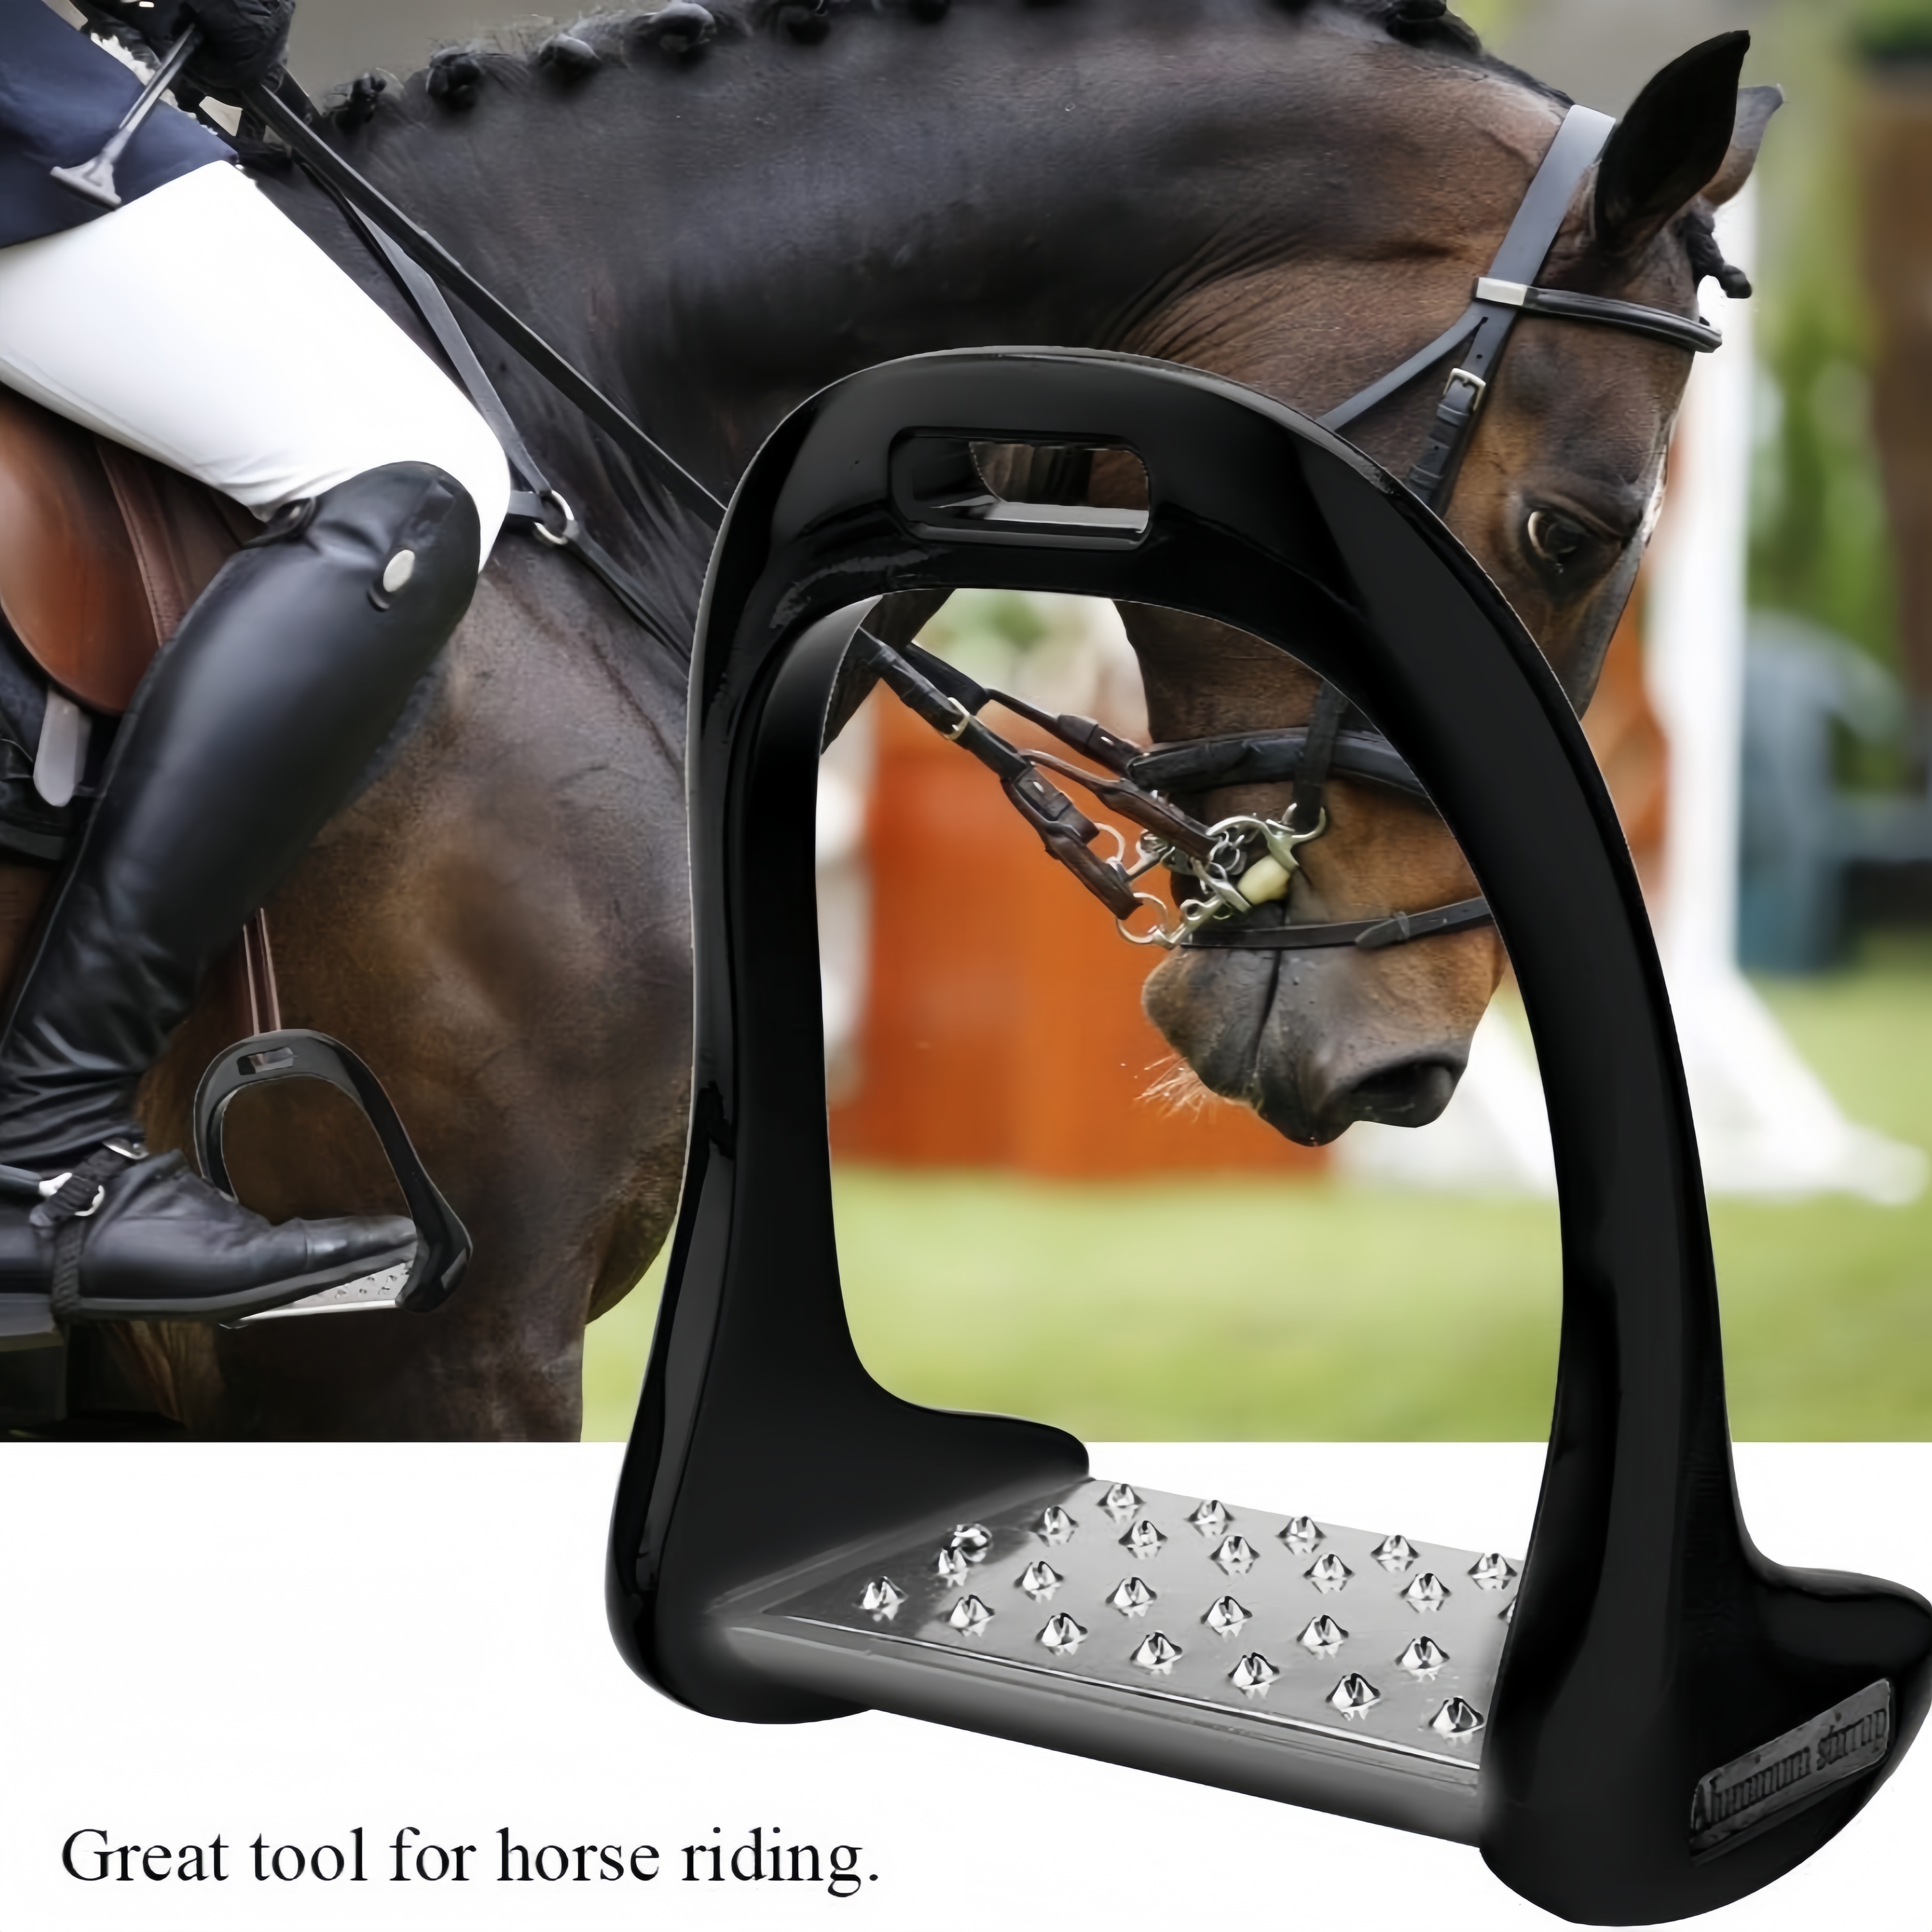 

Aluminum Alloy Horse Stirrups With Stainless Steel Non-slip Pedal For Horse Riding - Suitable For All Horse Species